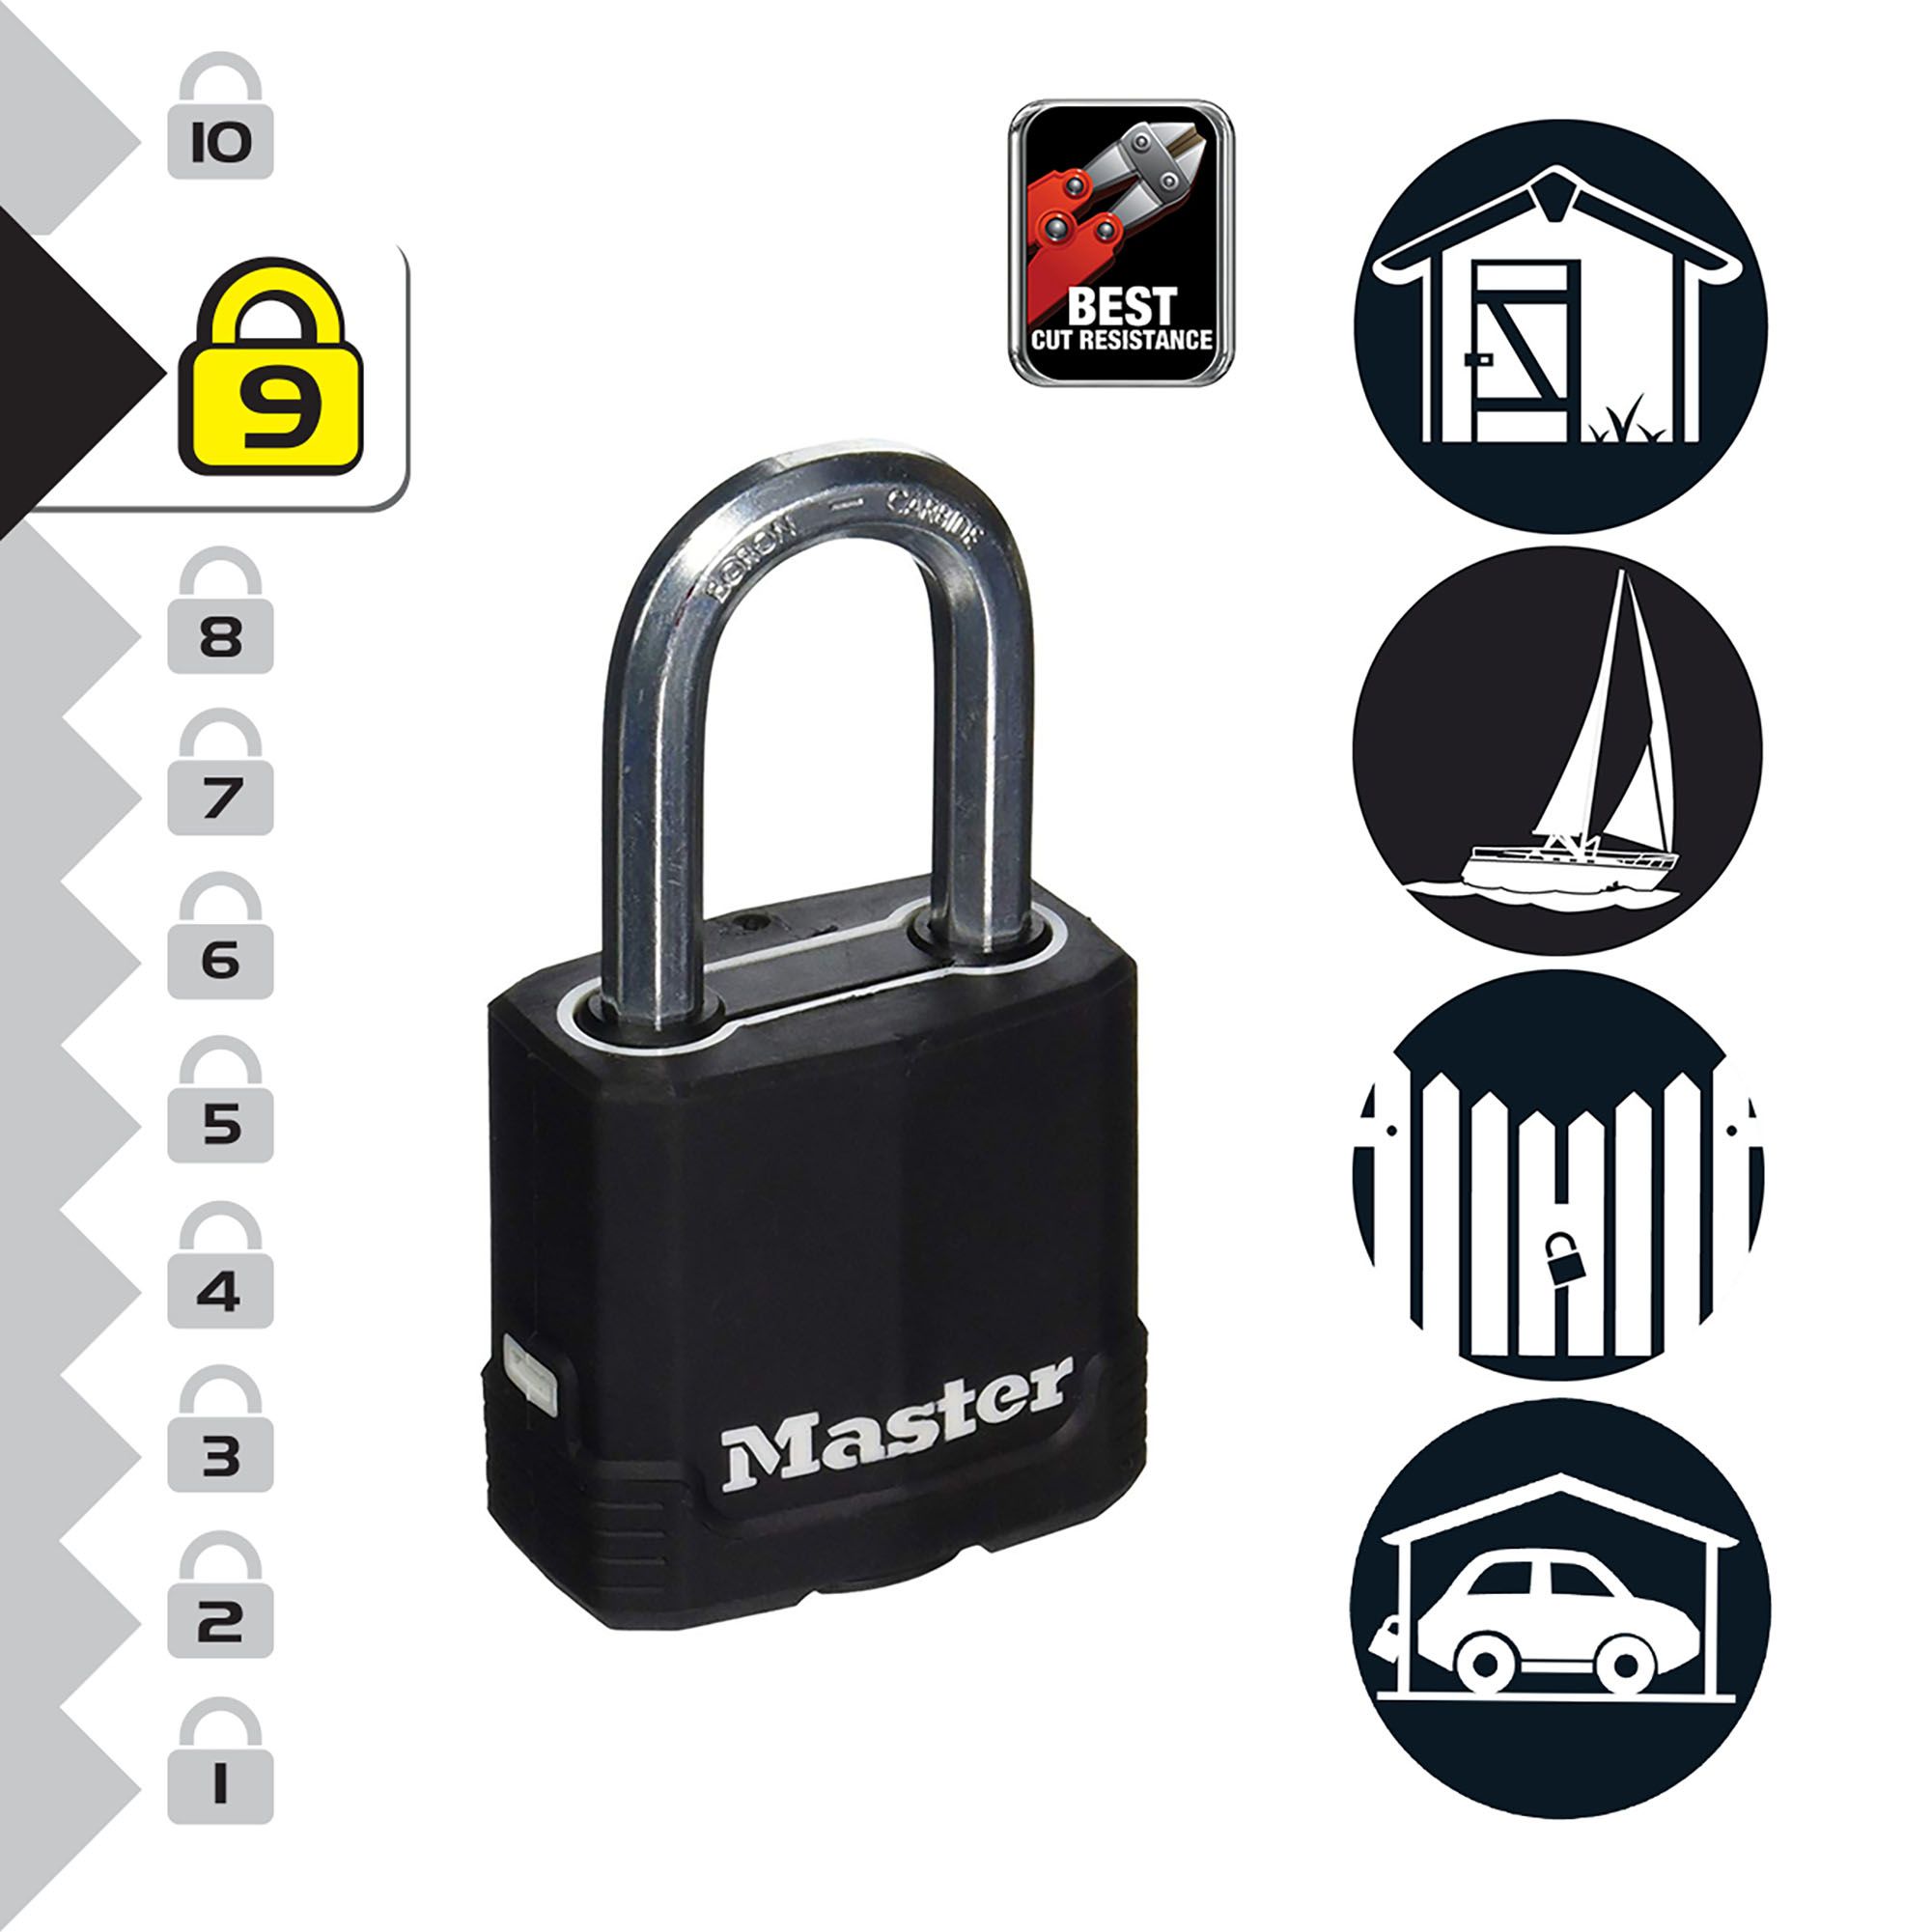 Master Lock Excell Heavy duty Laminated Steel Black Large Open shackle Padlock (W)54mm